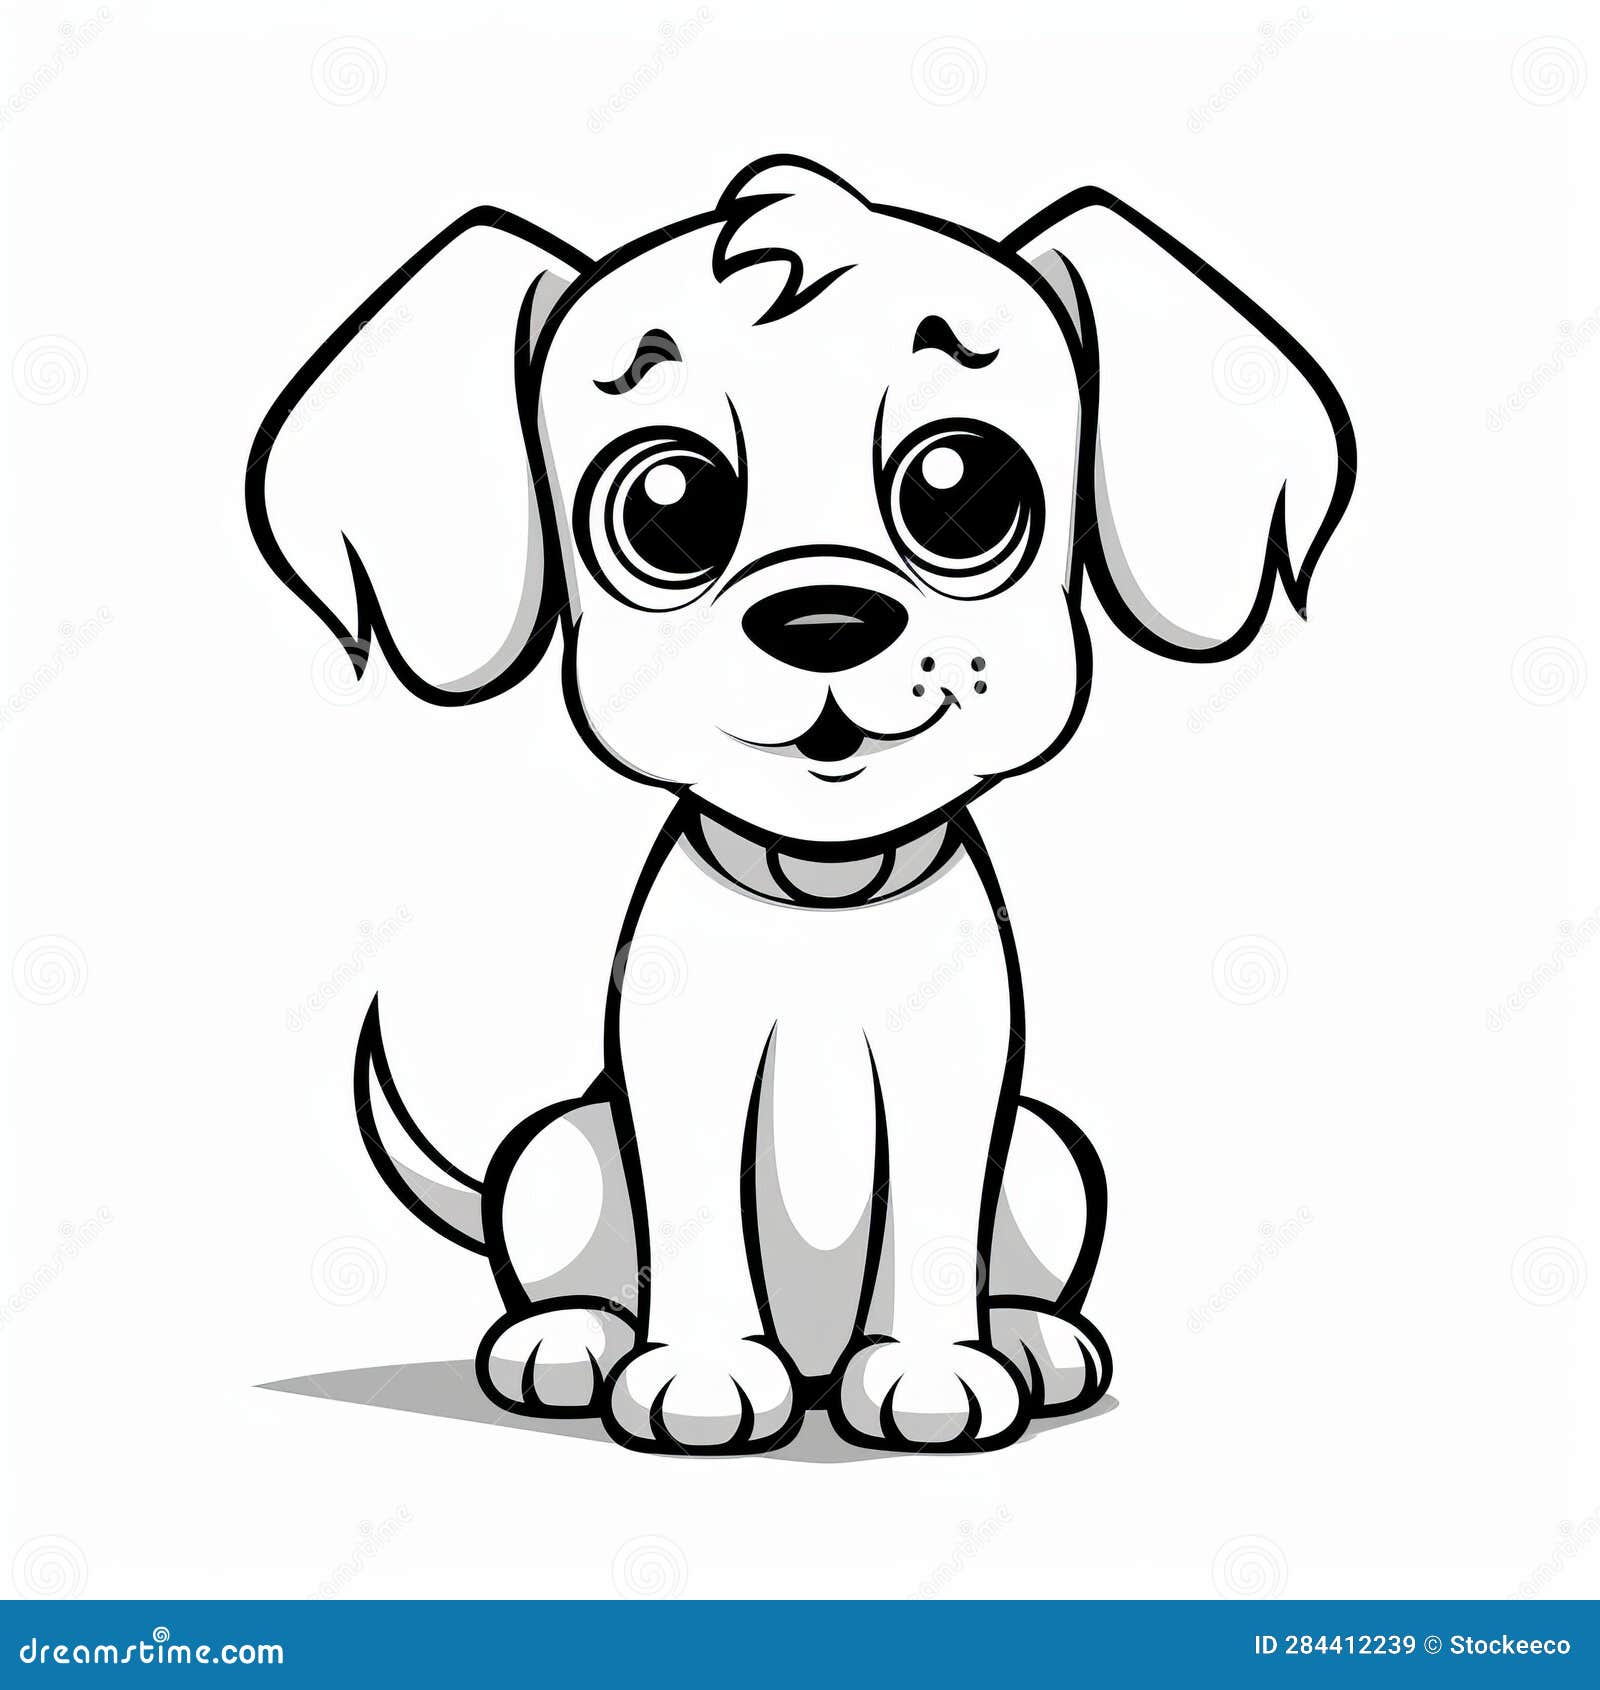 Puppy Coloring Pages - World of Printables